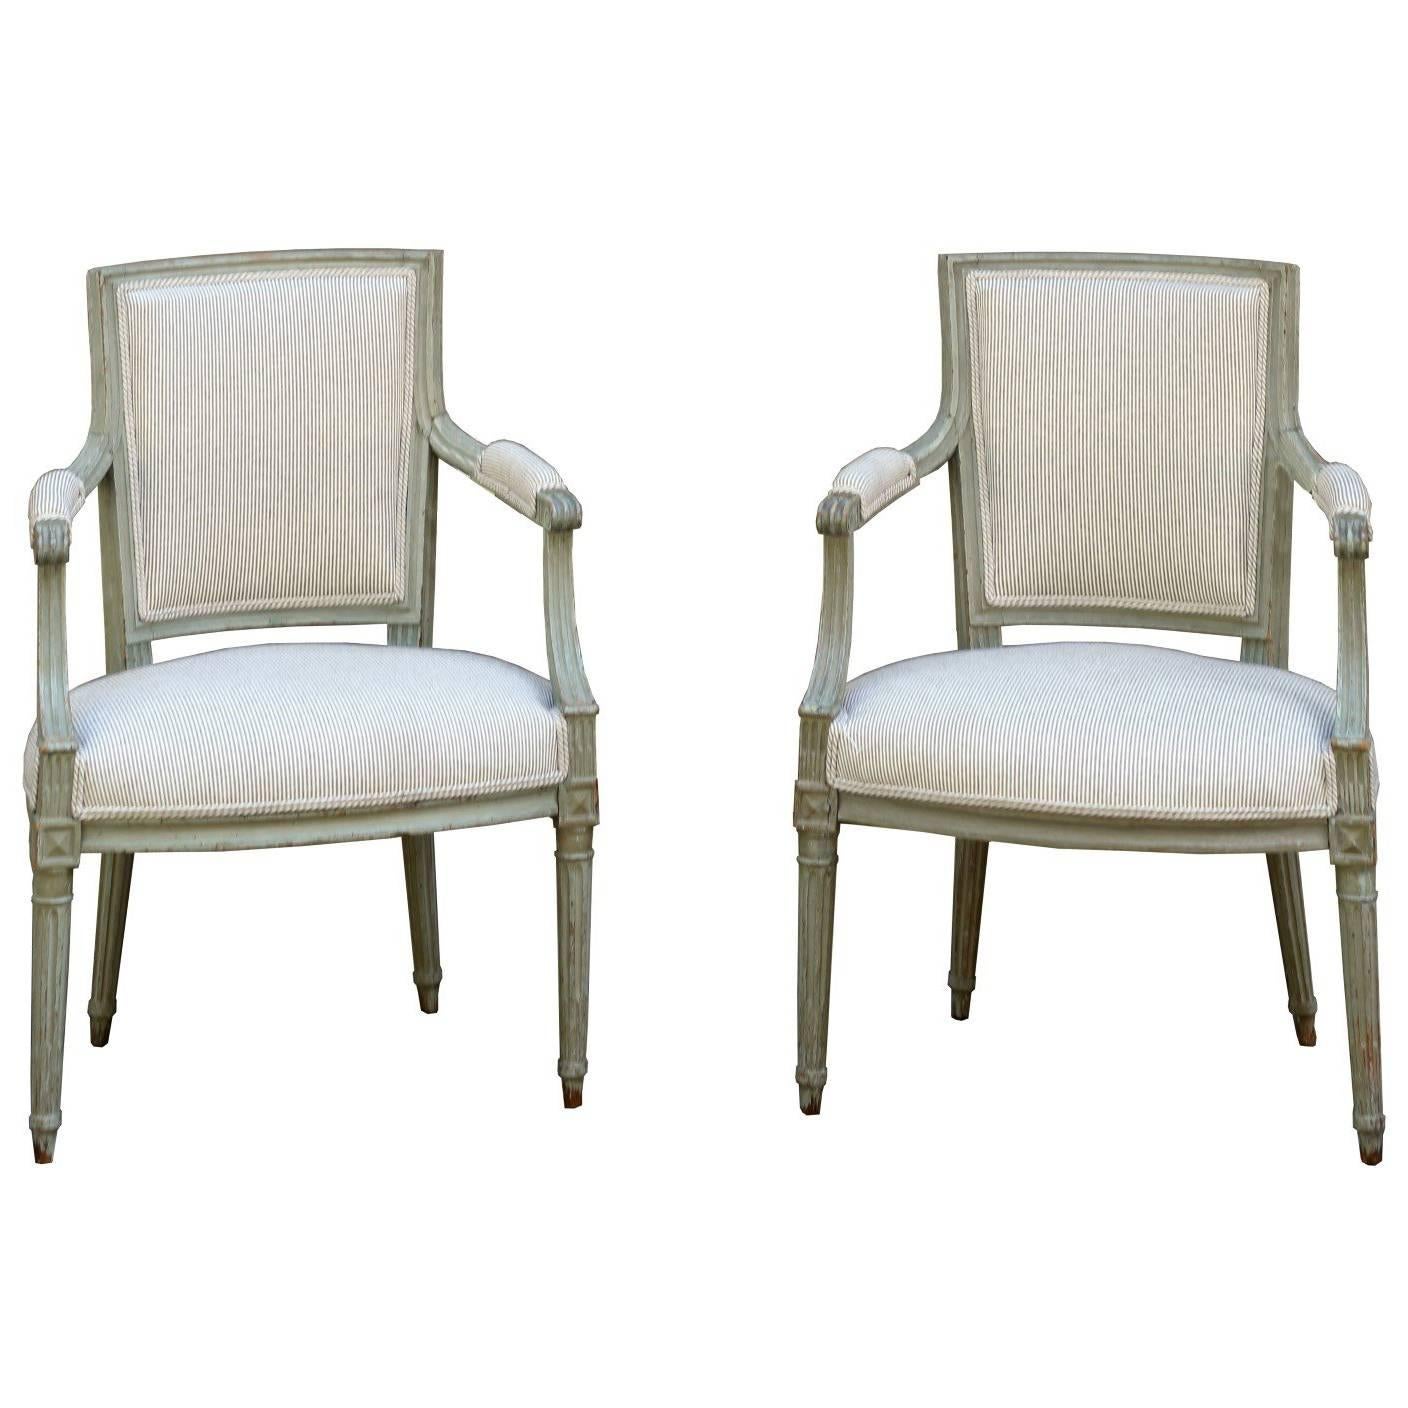 Pair of French Louis XVI Style Armchairs with Cotton Mattress Ticking Upholstery